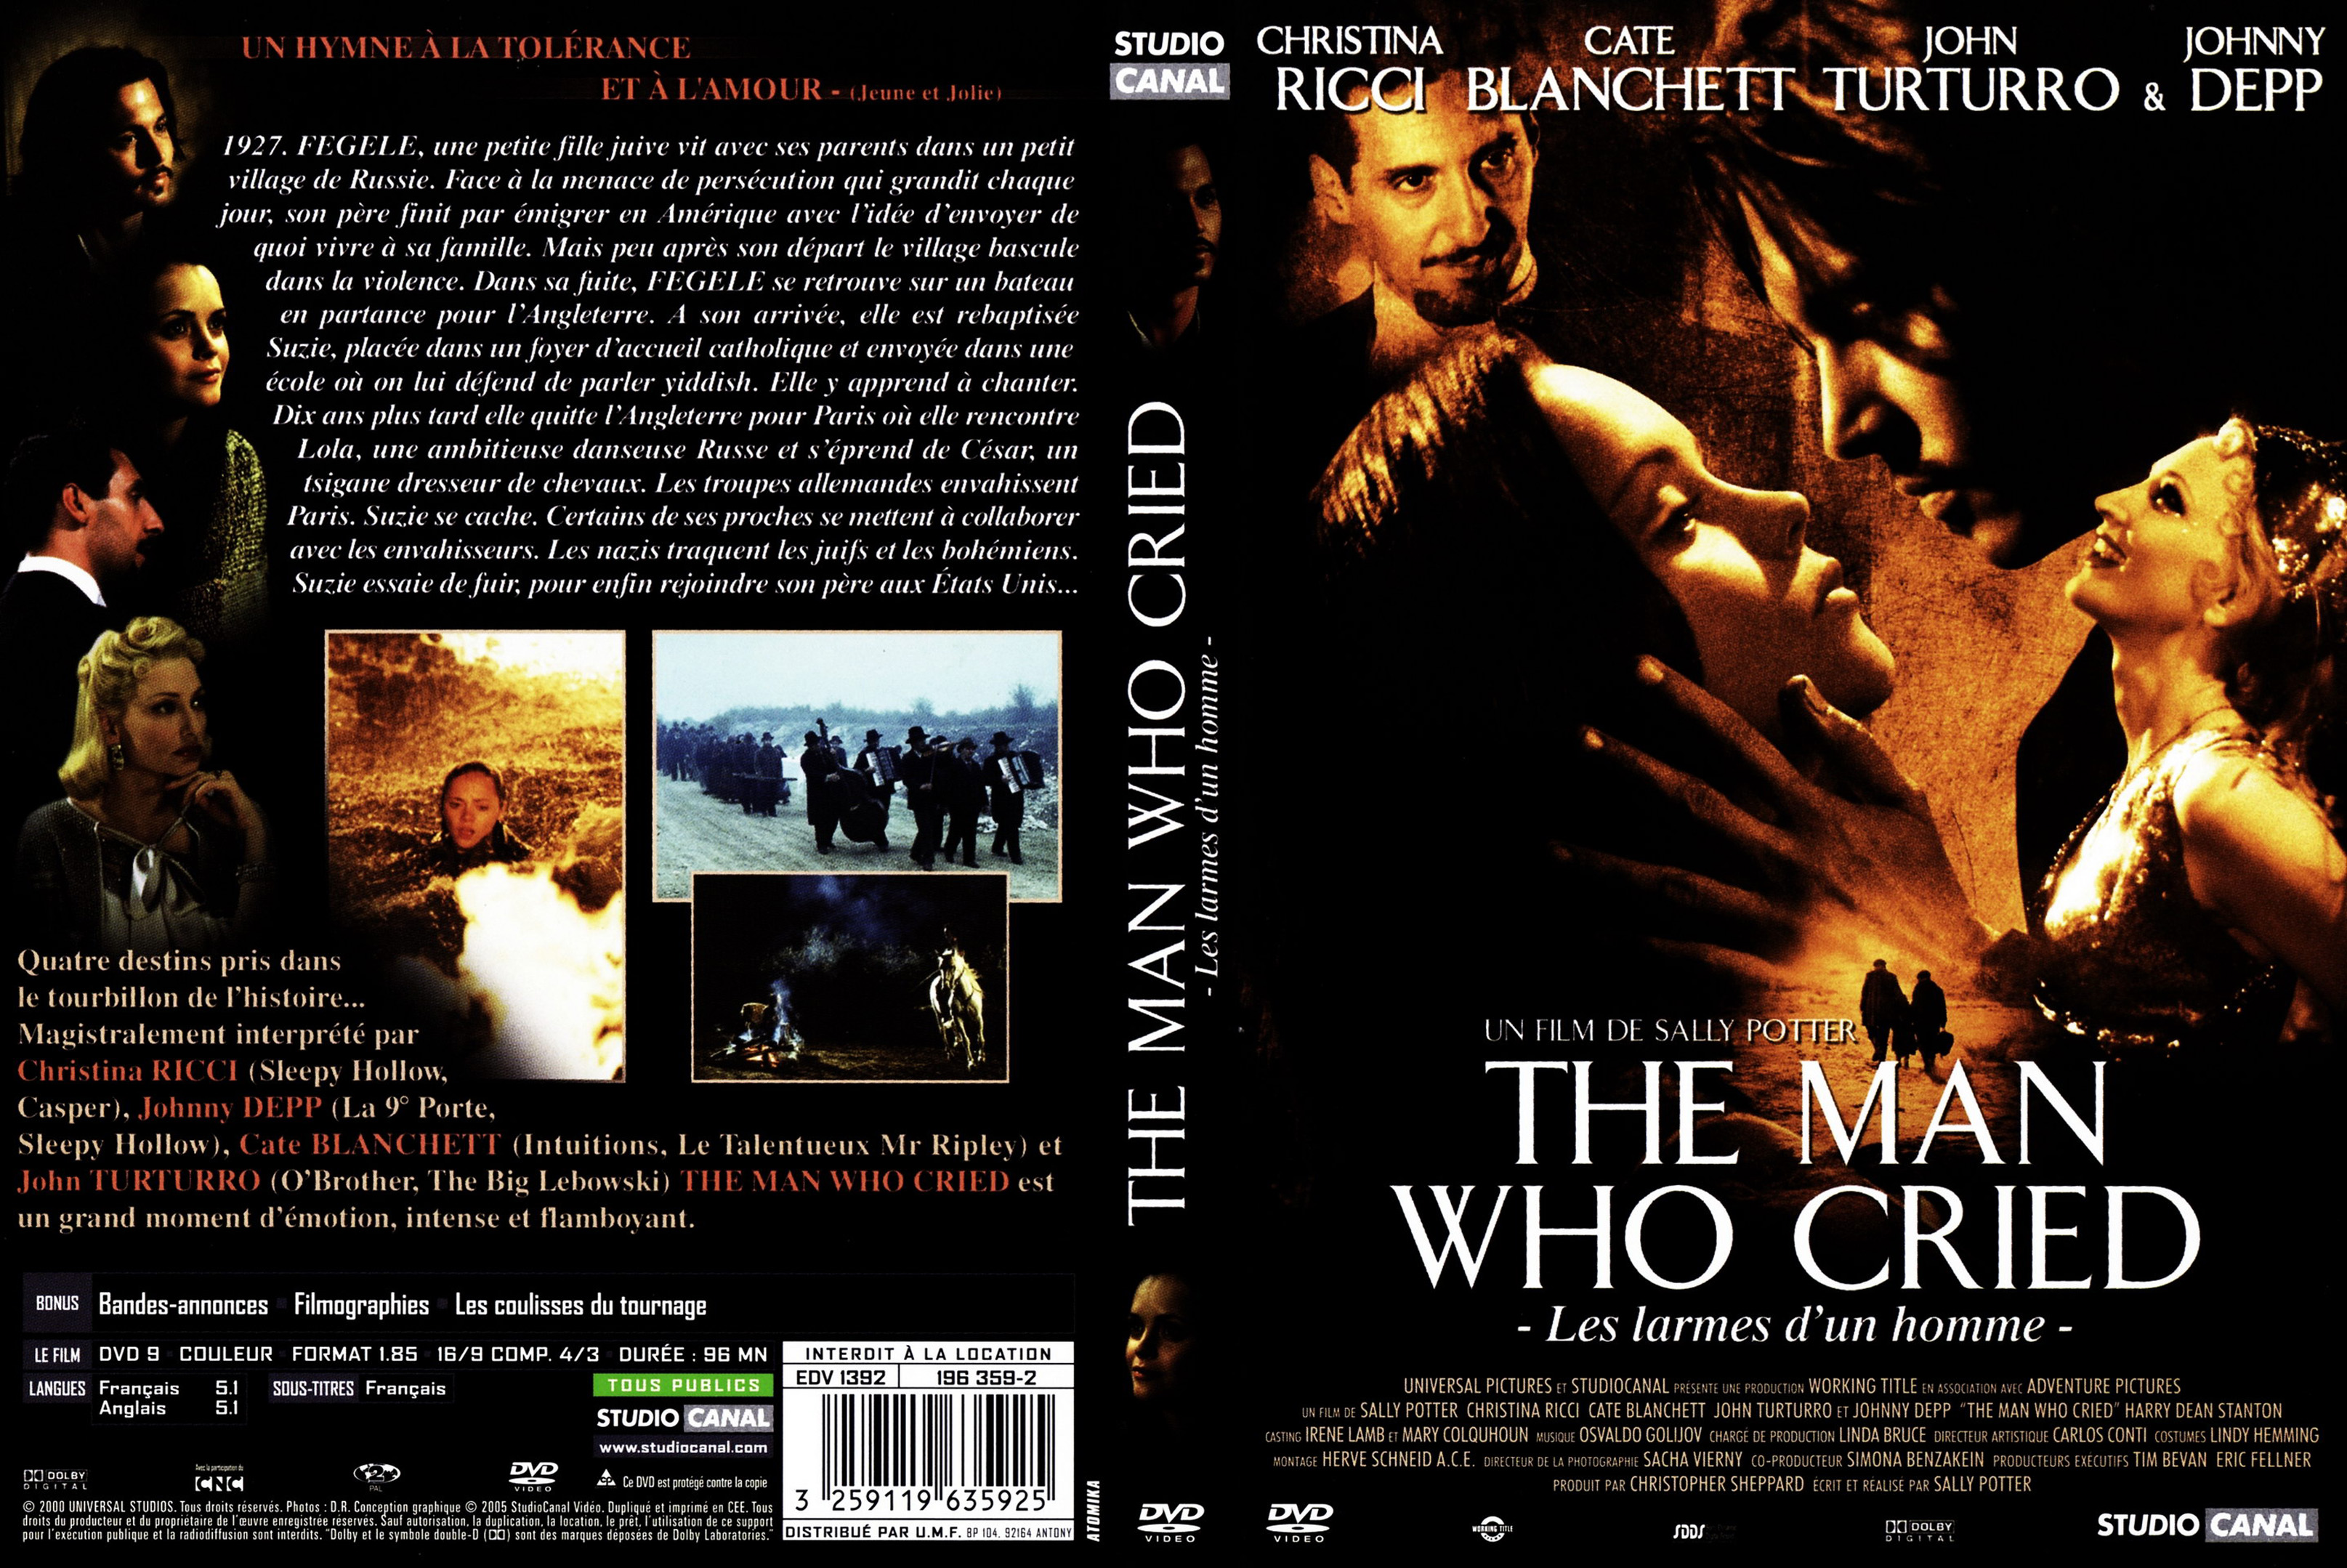 Jaquette DVD The man who cried